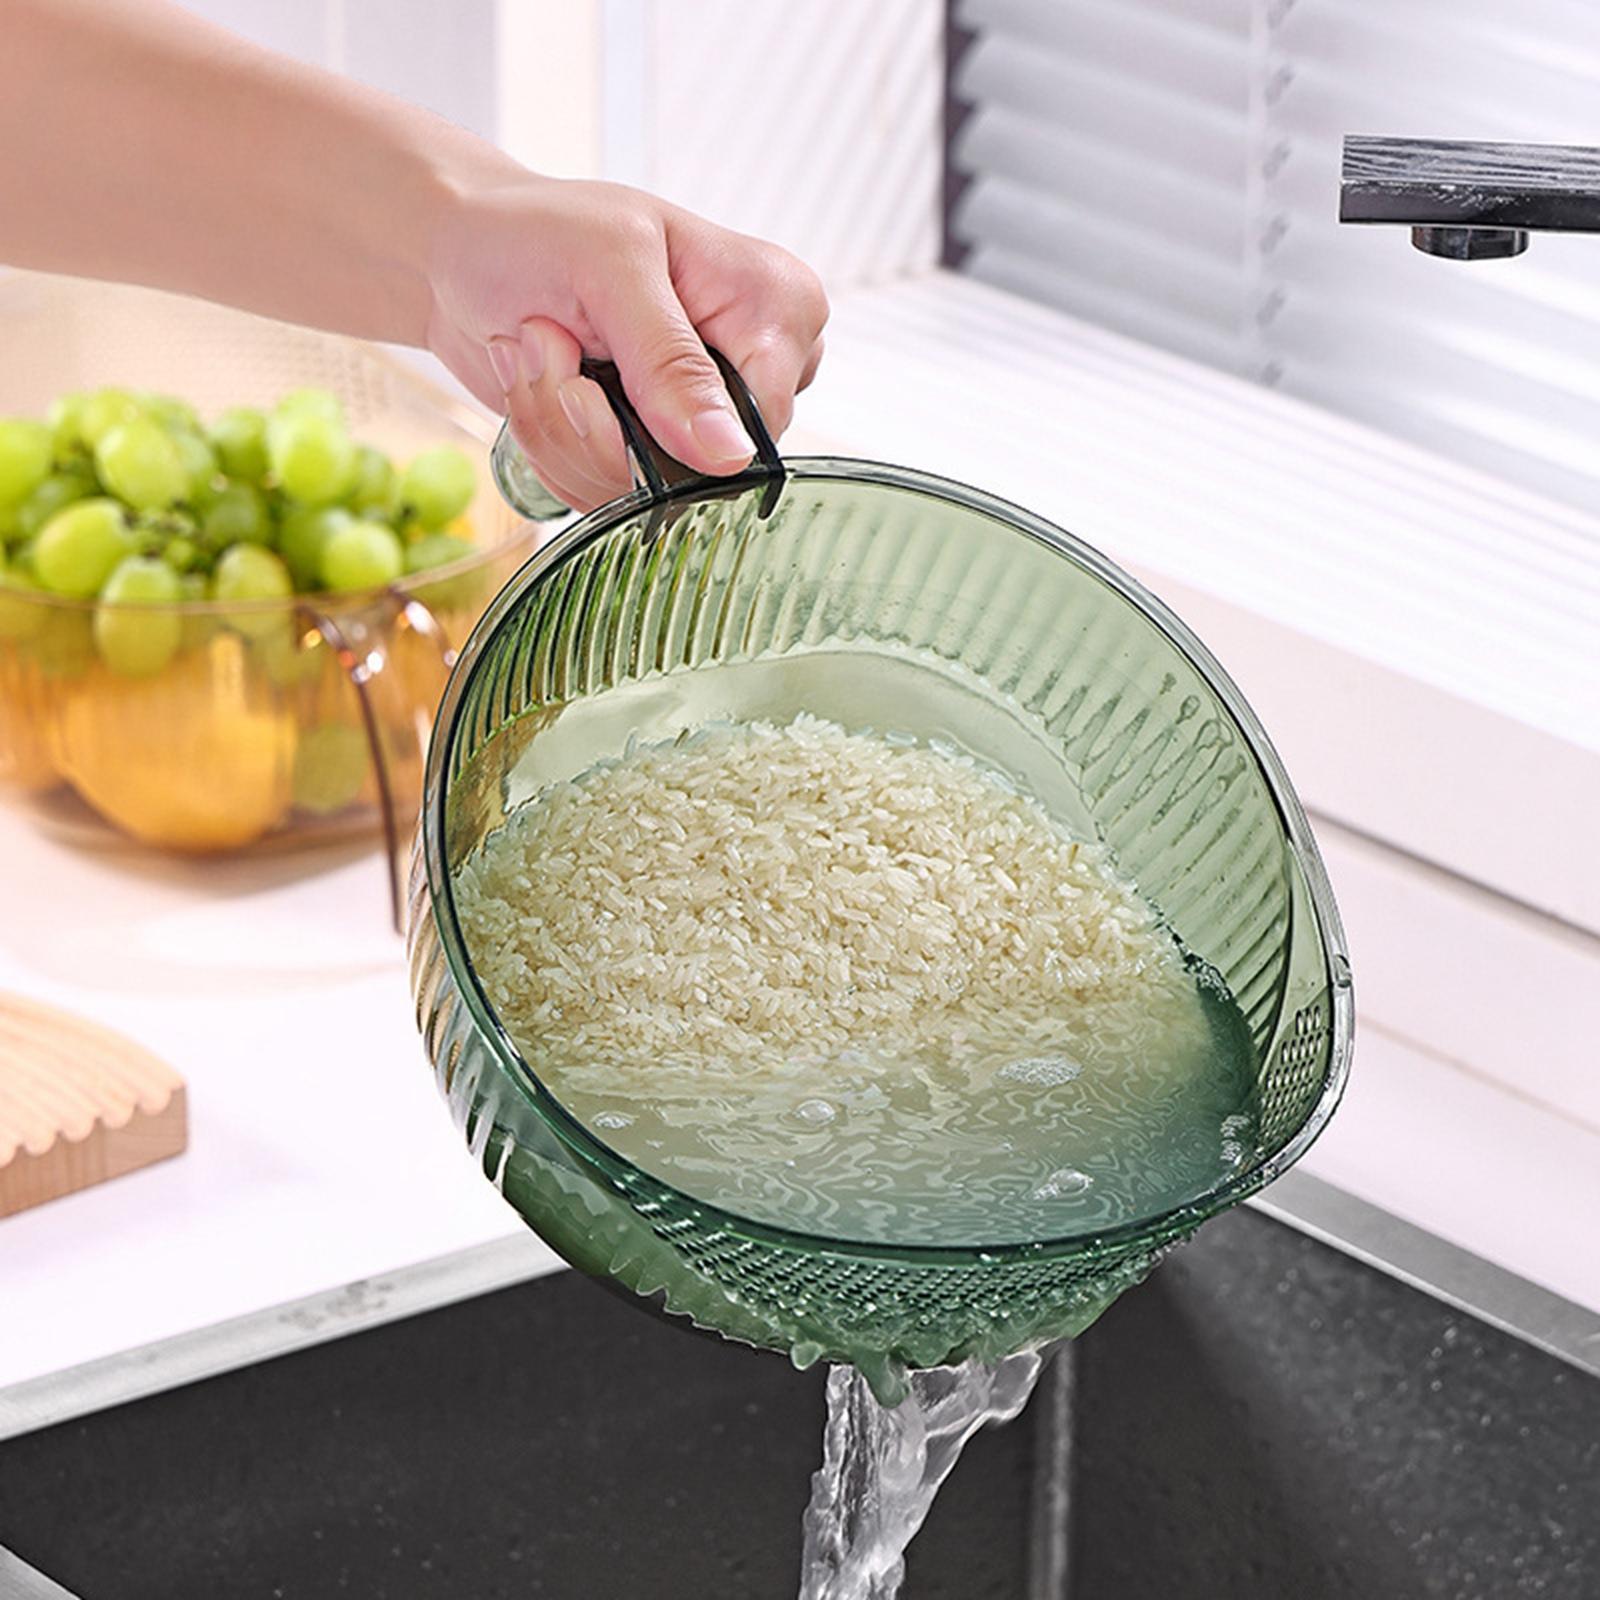 Washing Colander with Handle Rice Washing Strainer for Grain Spinach Carrots